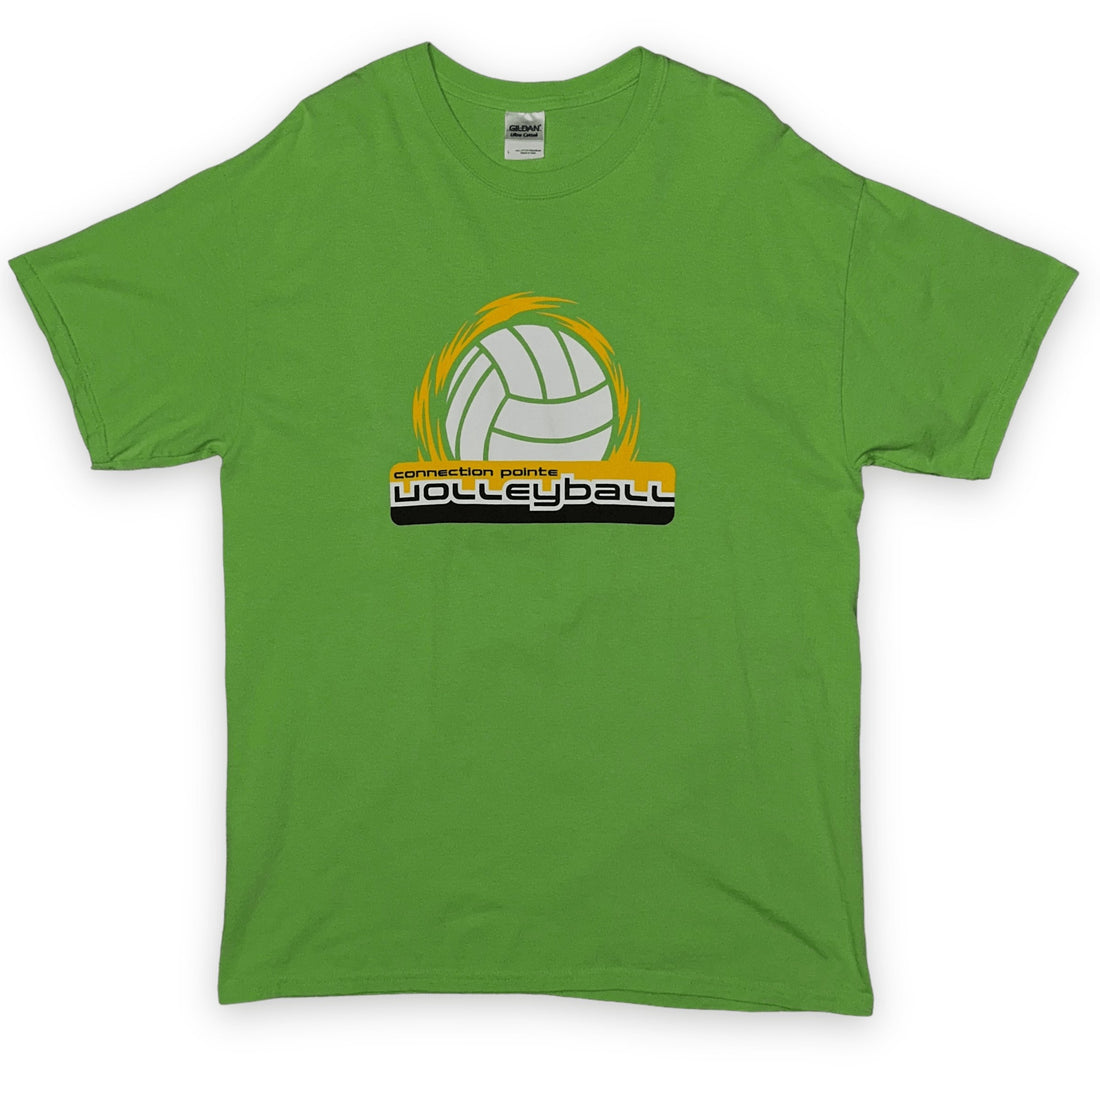 T-shirt Volleyball (L) - oldstyleclothing